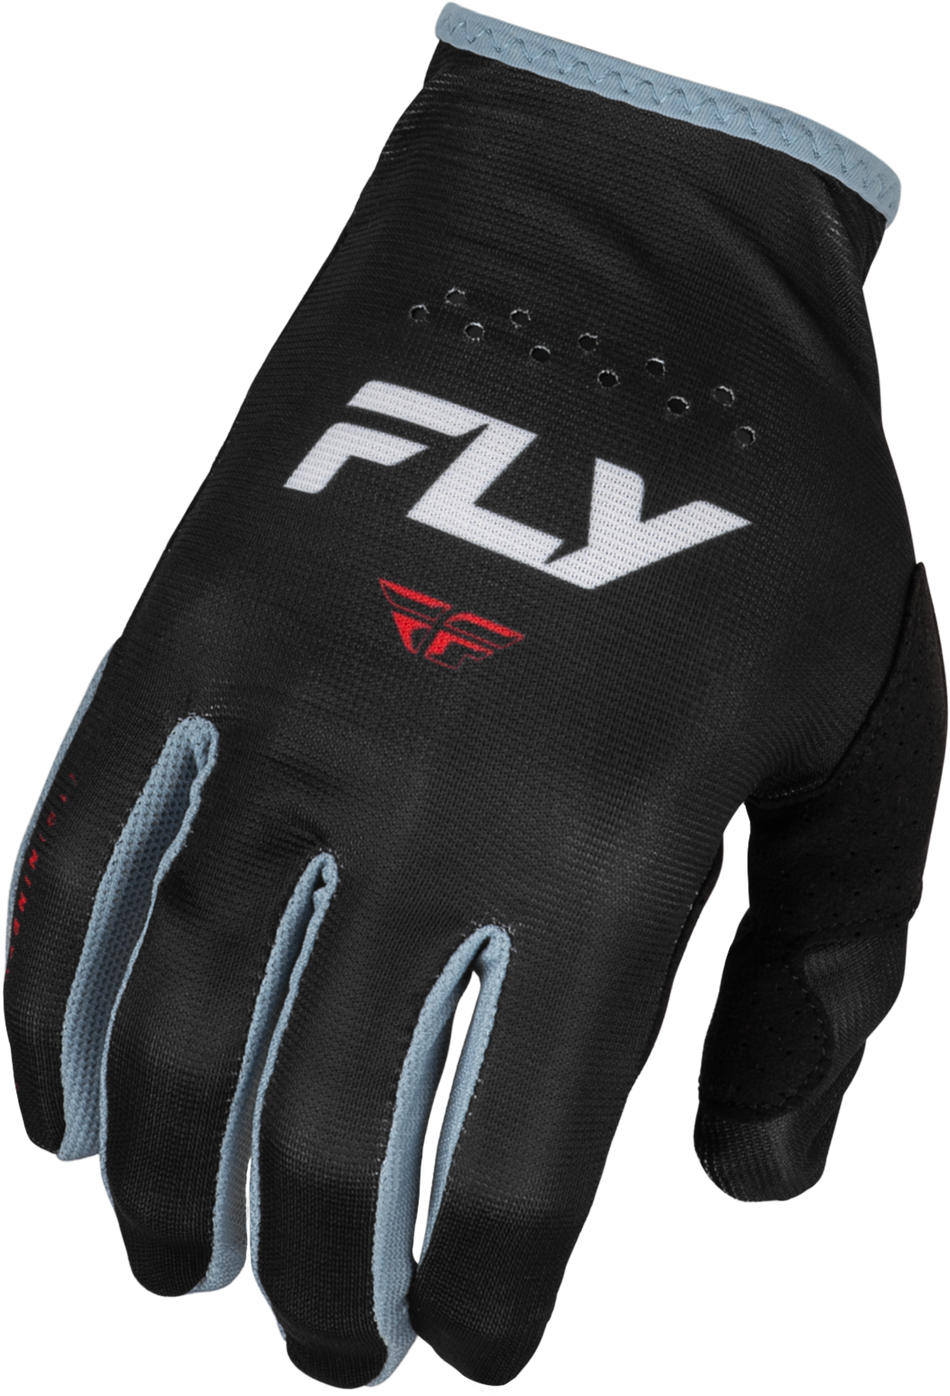 FLY RACING Lite Gloves Black/White/Red 3x 377-7103X